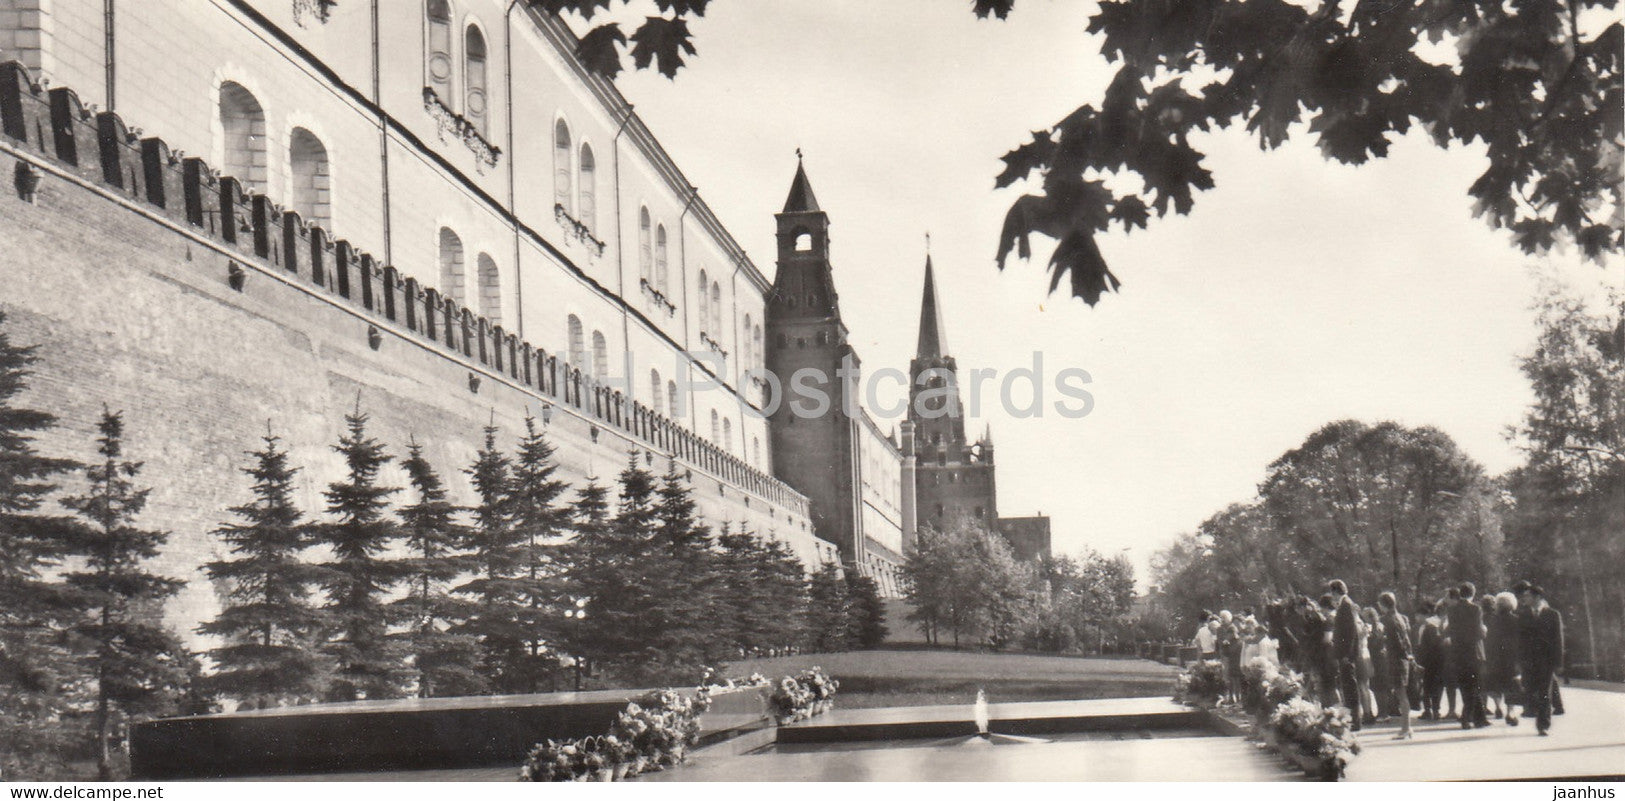 Moscow Kremlin - The Grave of the Unknown Soldier - 1971 - Russia USSR - unused - JH Postcards